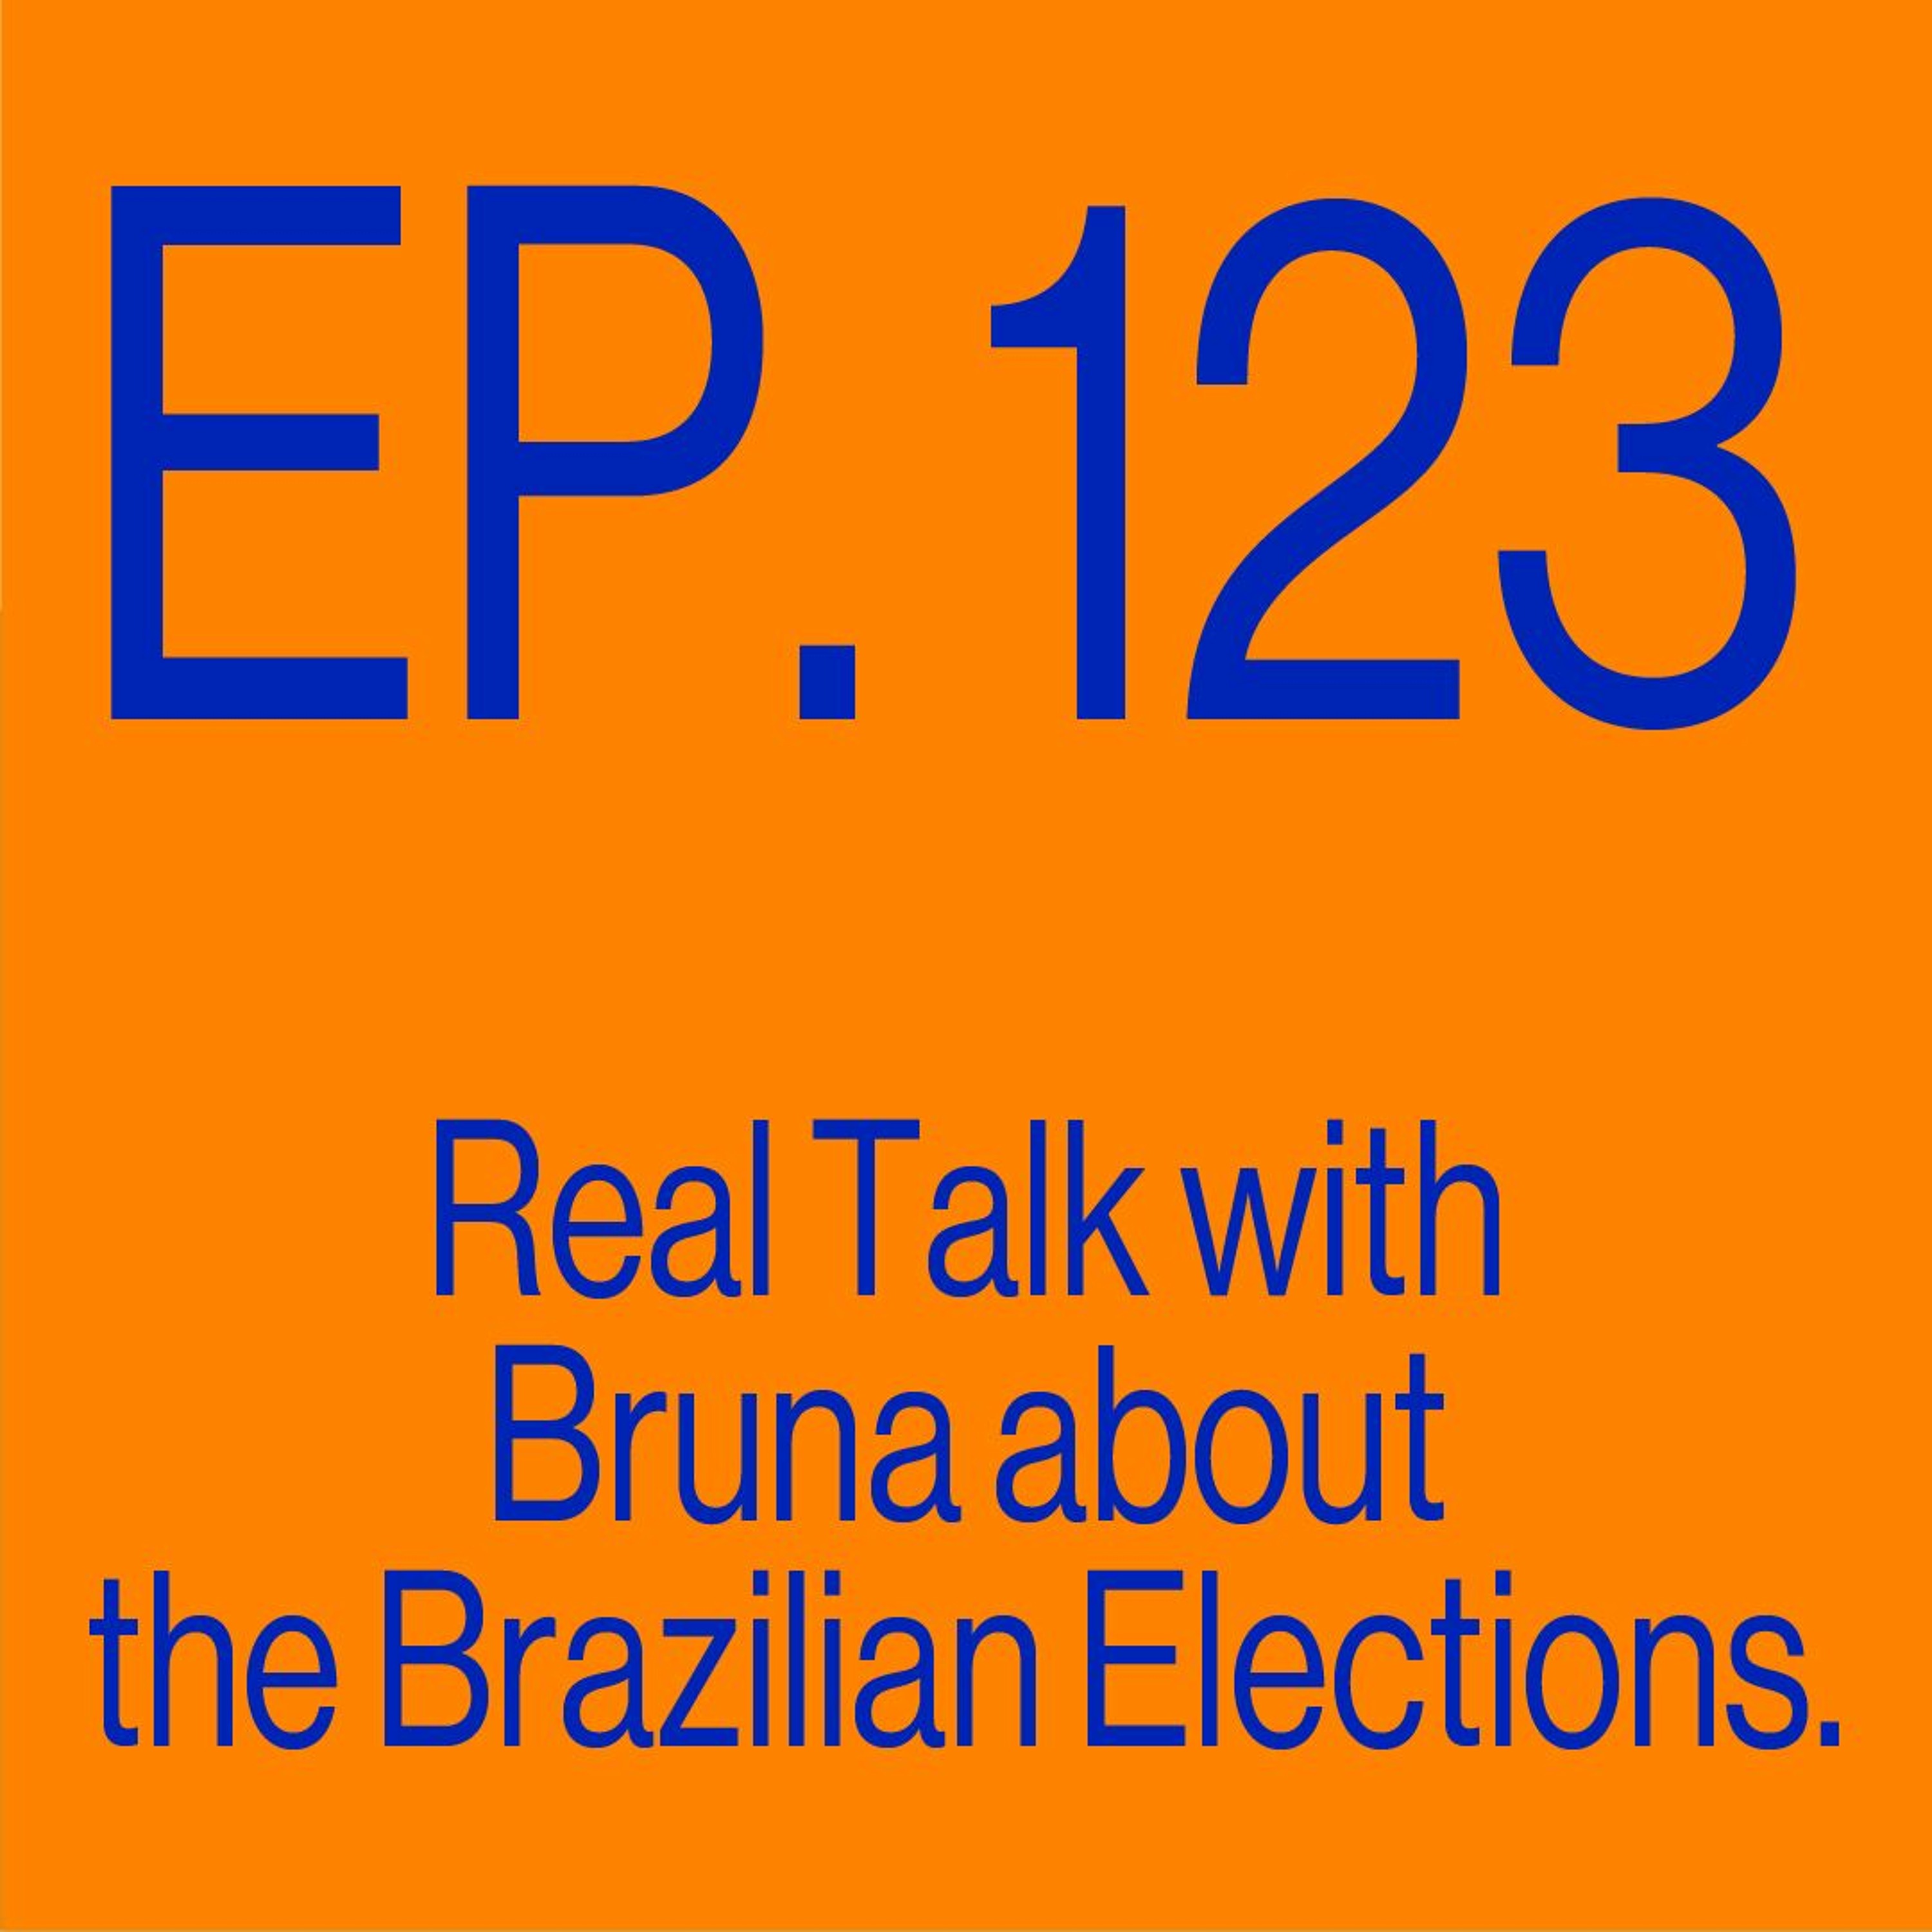 Episode 123: Real Talk with Bruna about the Brazilian Elections